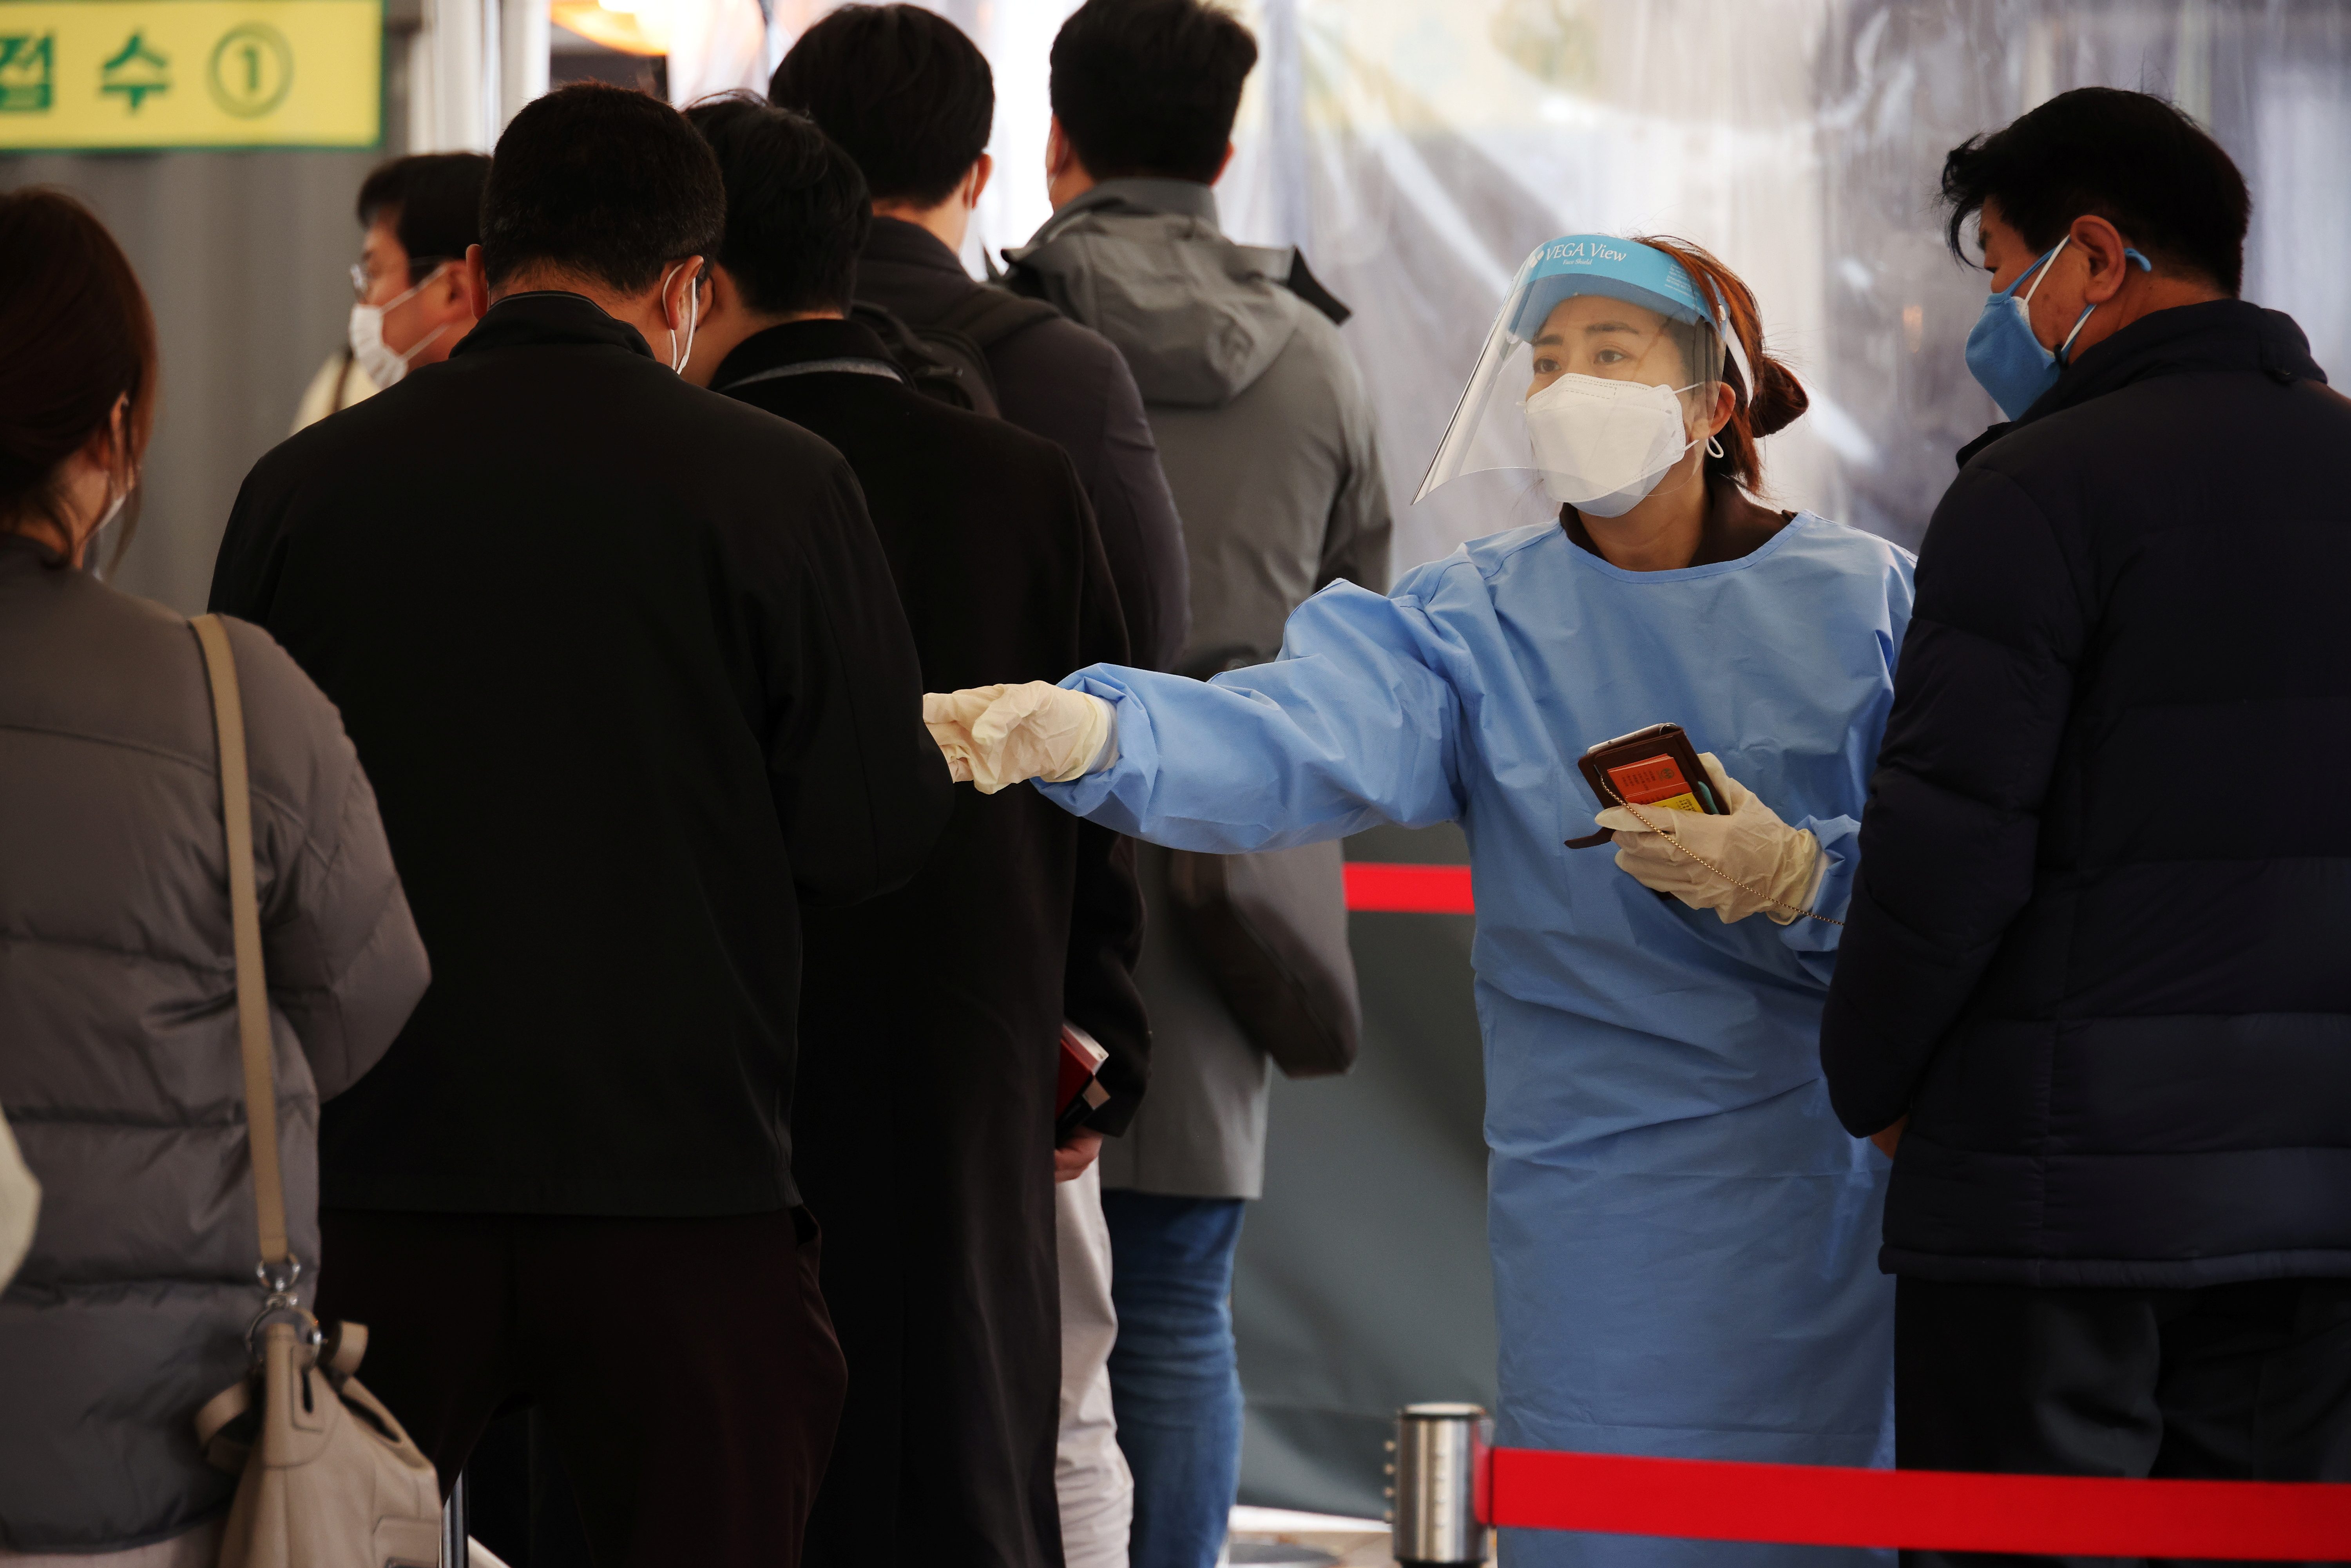 South Korea urges COVID-19 booster shots, as severe cases hit record